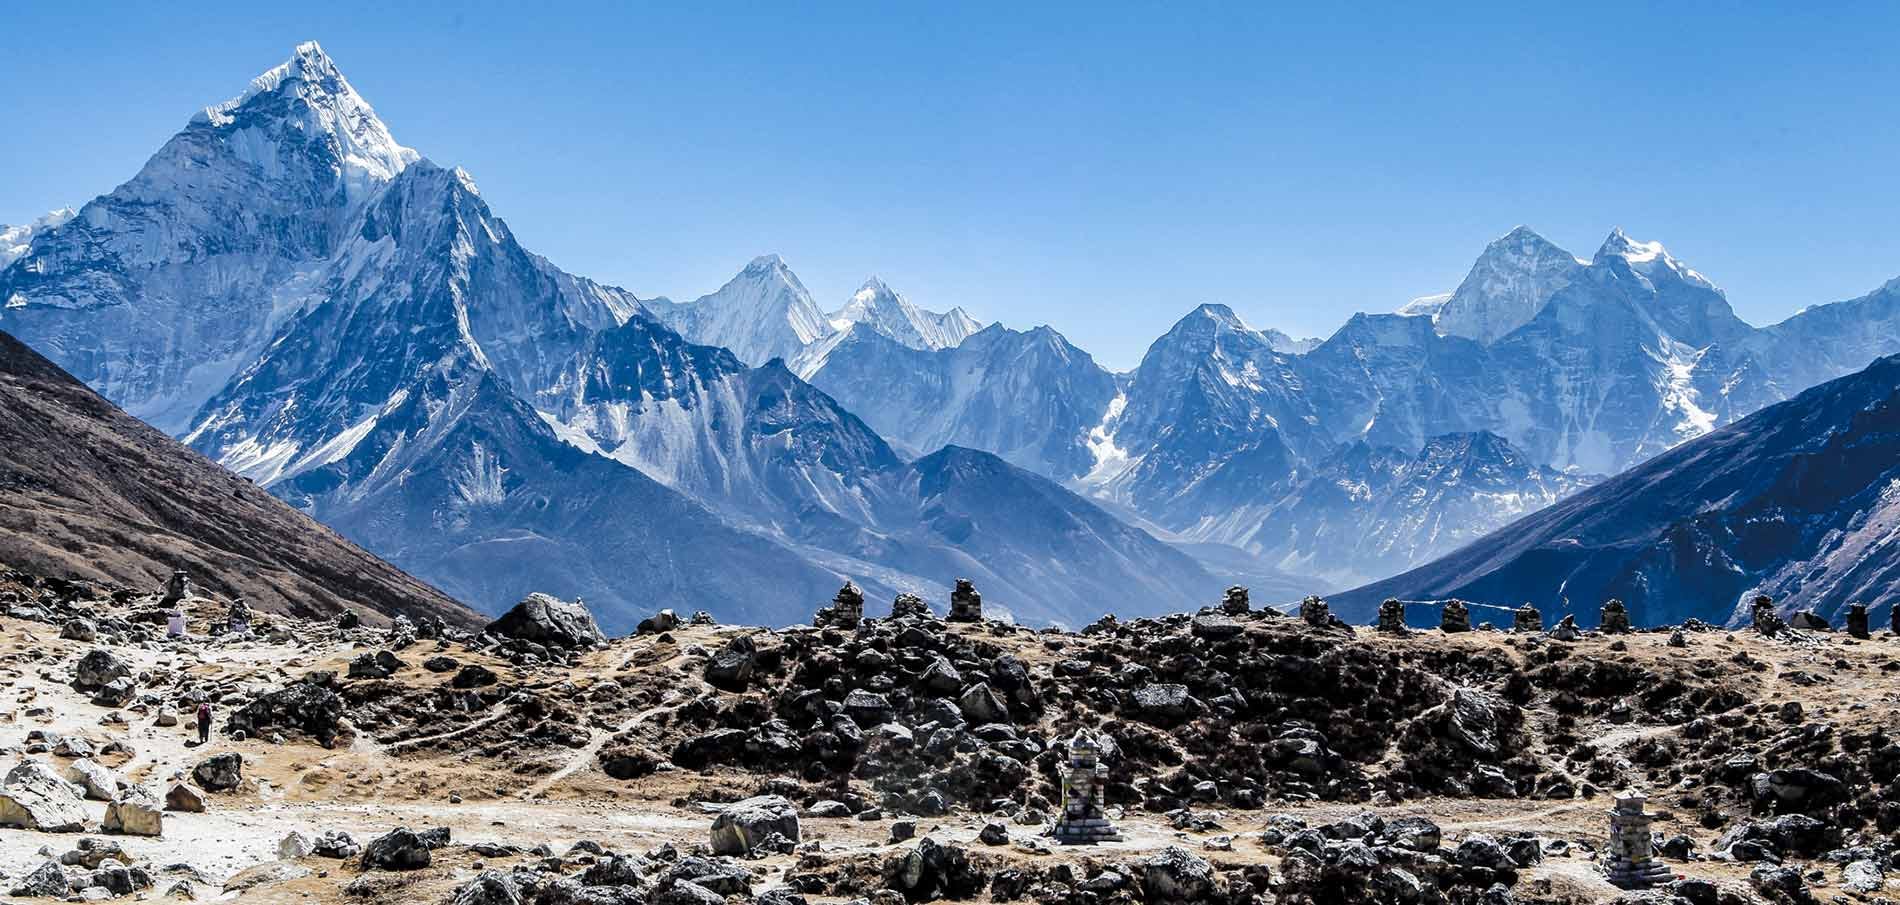 The Ultimate Guide for VIP Trekking in Nepal